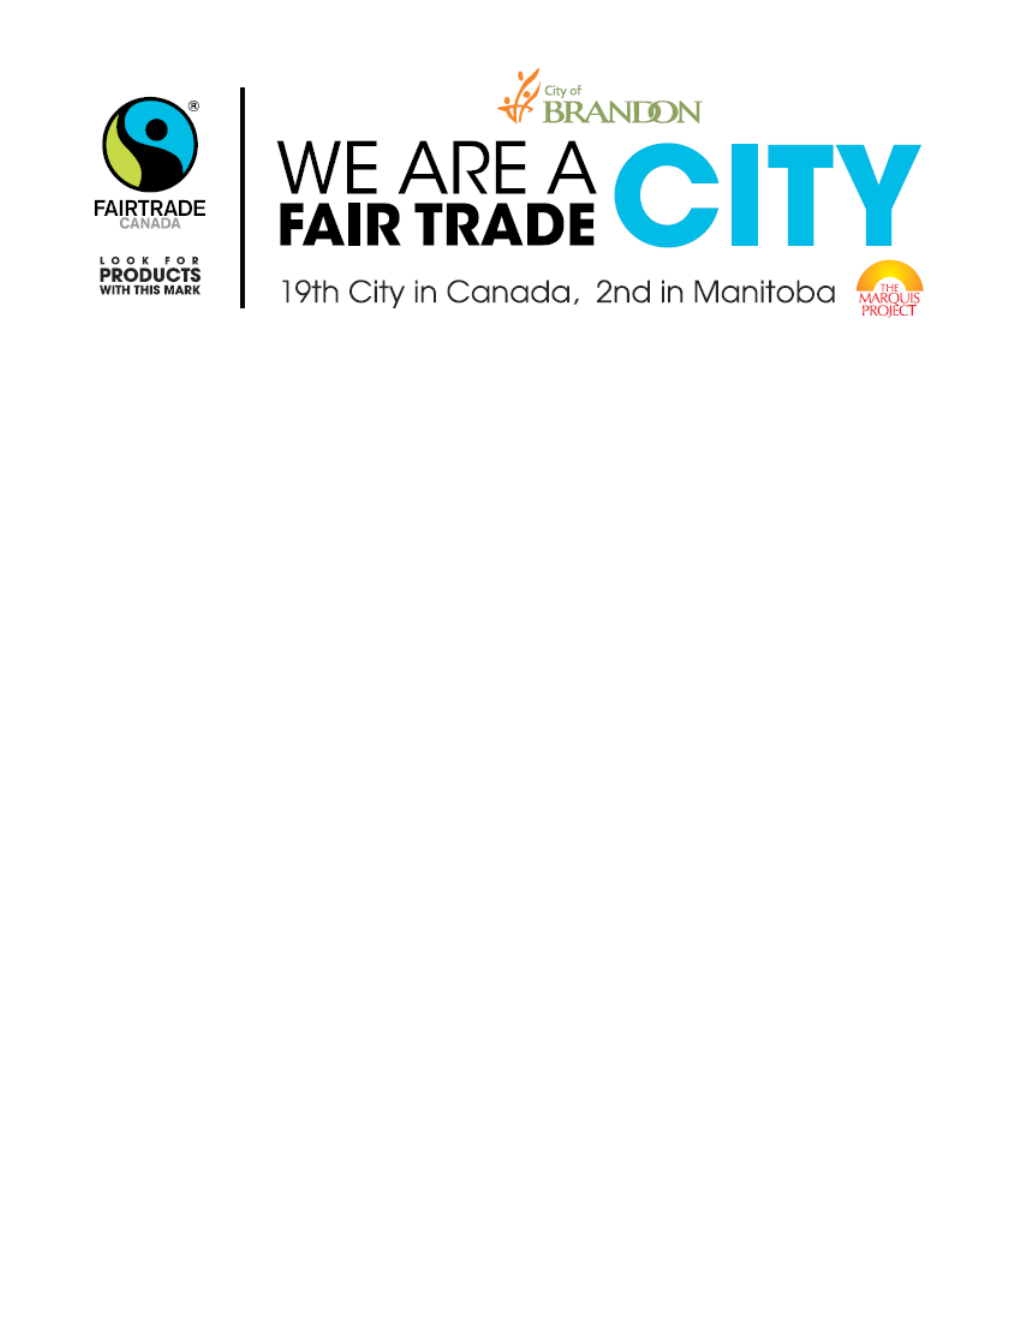 Fairtrade Products Available in the City of Brandon S Stores